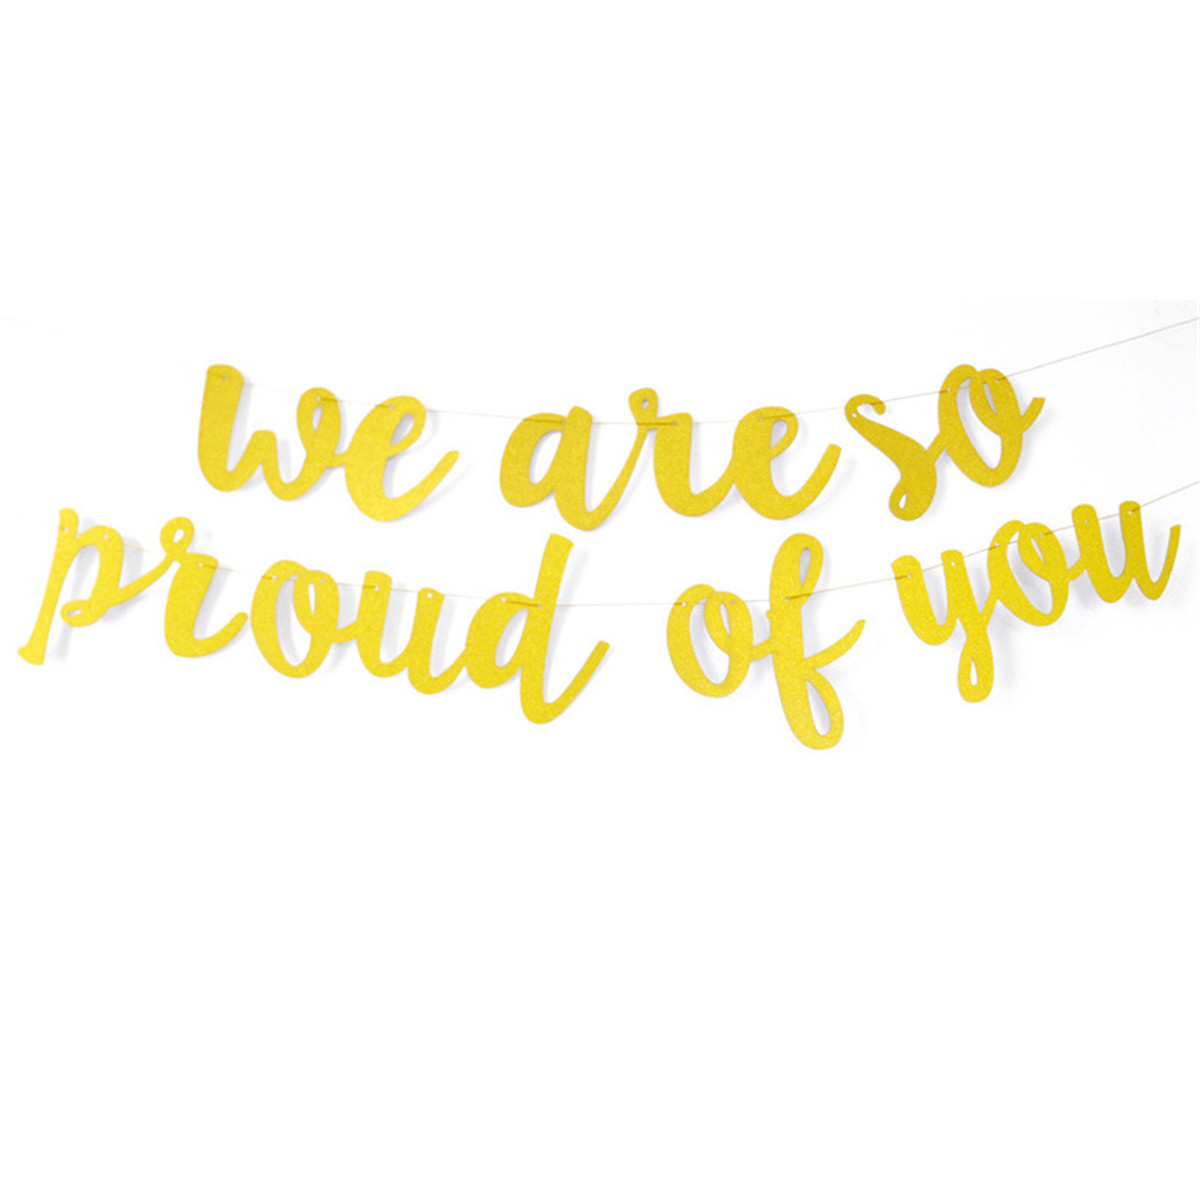 Graduation-Party-Banner-Golden-Shining-We-Are-So-Proud-Of-You-Paper-Hat--Hanging-Banner-Party-Decora-1821560